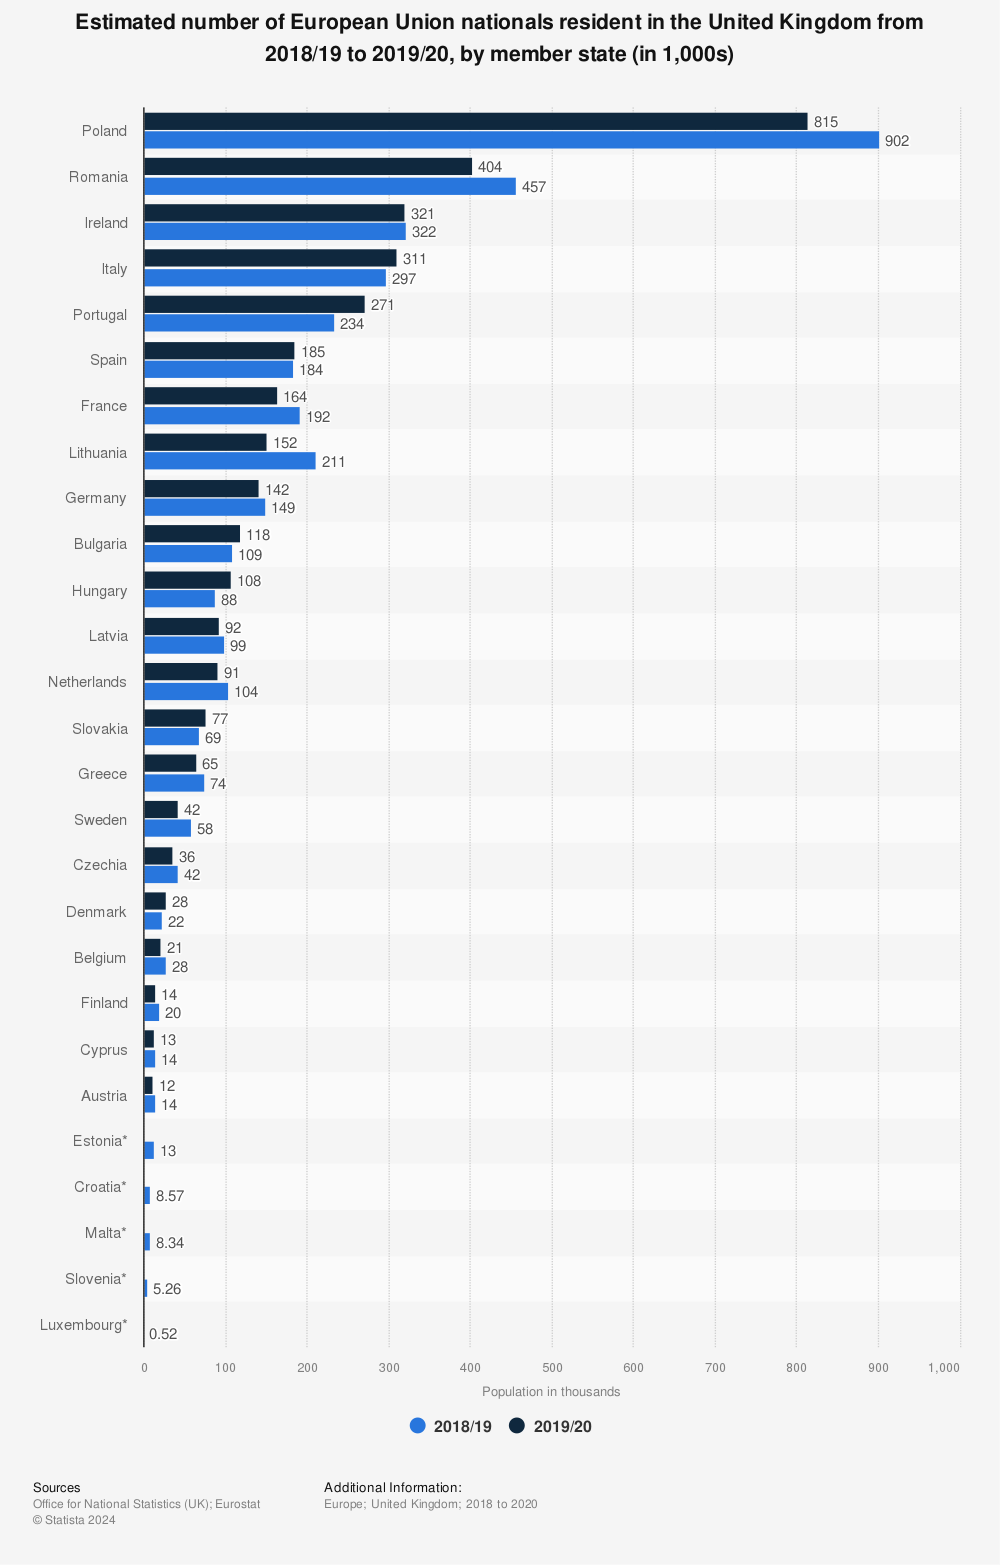 Statistic: Estimated number of European Union nationals resident in the United Kingdom from 2018/19 to 2019/20, by member state (in 1,000s) | Statista